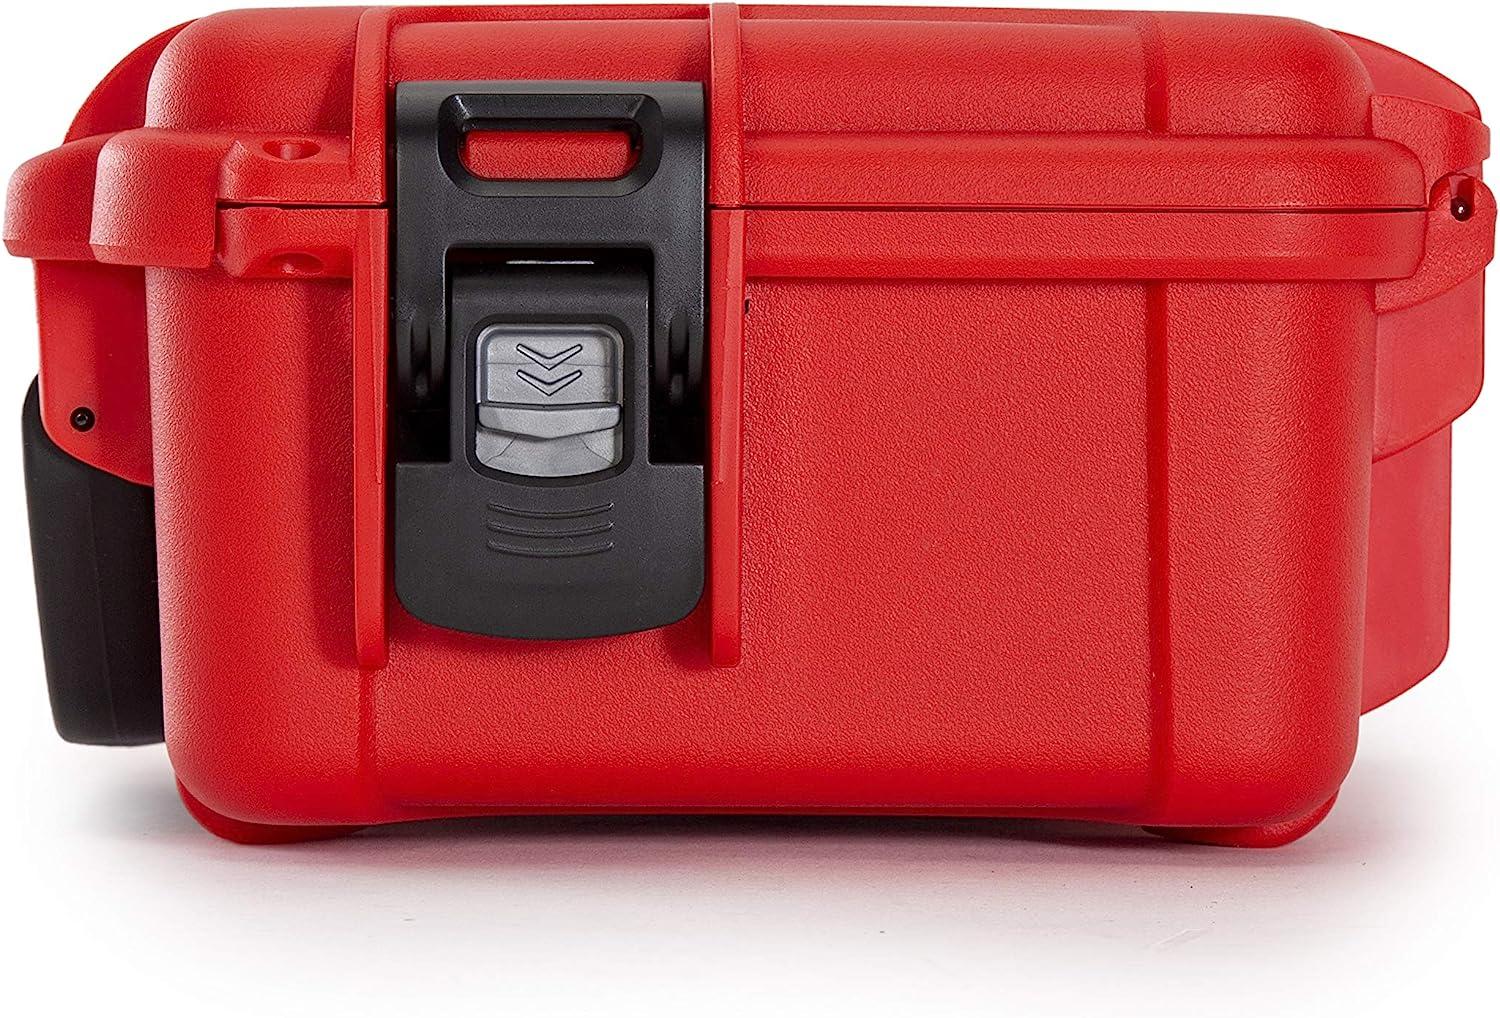 Nanuk 904 Waterproof First Aid Prepper Survival Gear Dust and Impact  Resistant Case - Empty - Red 904 First Aid Case